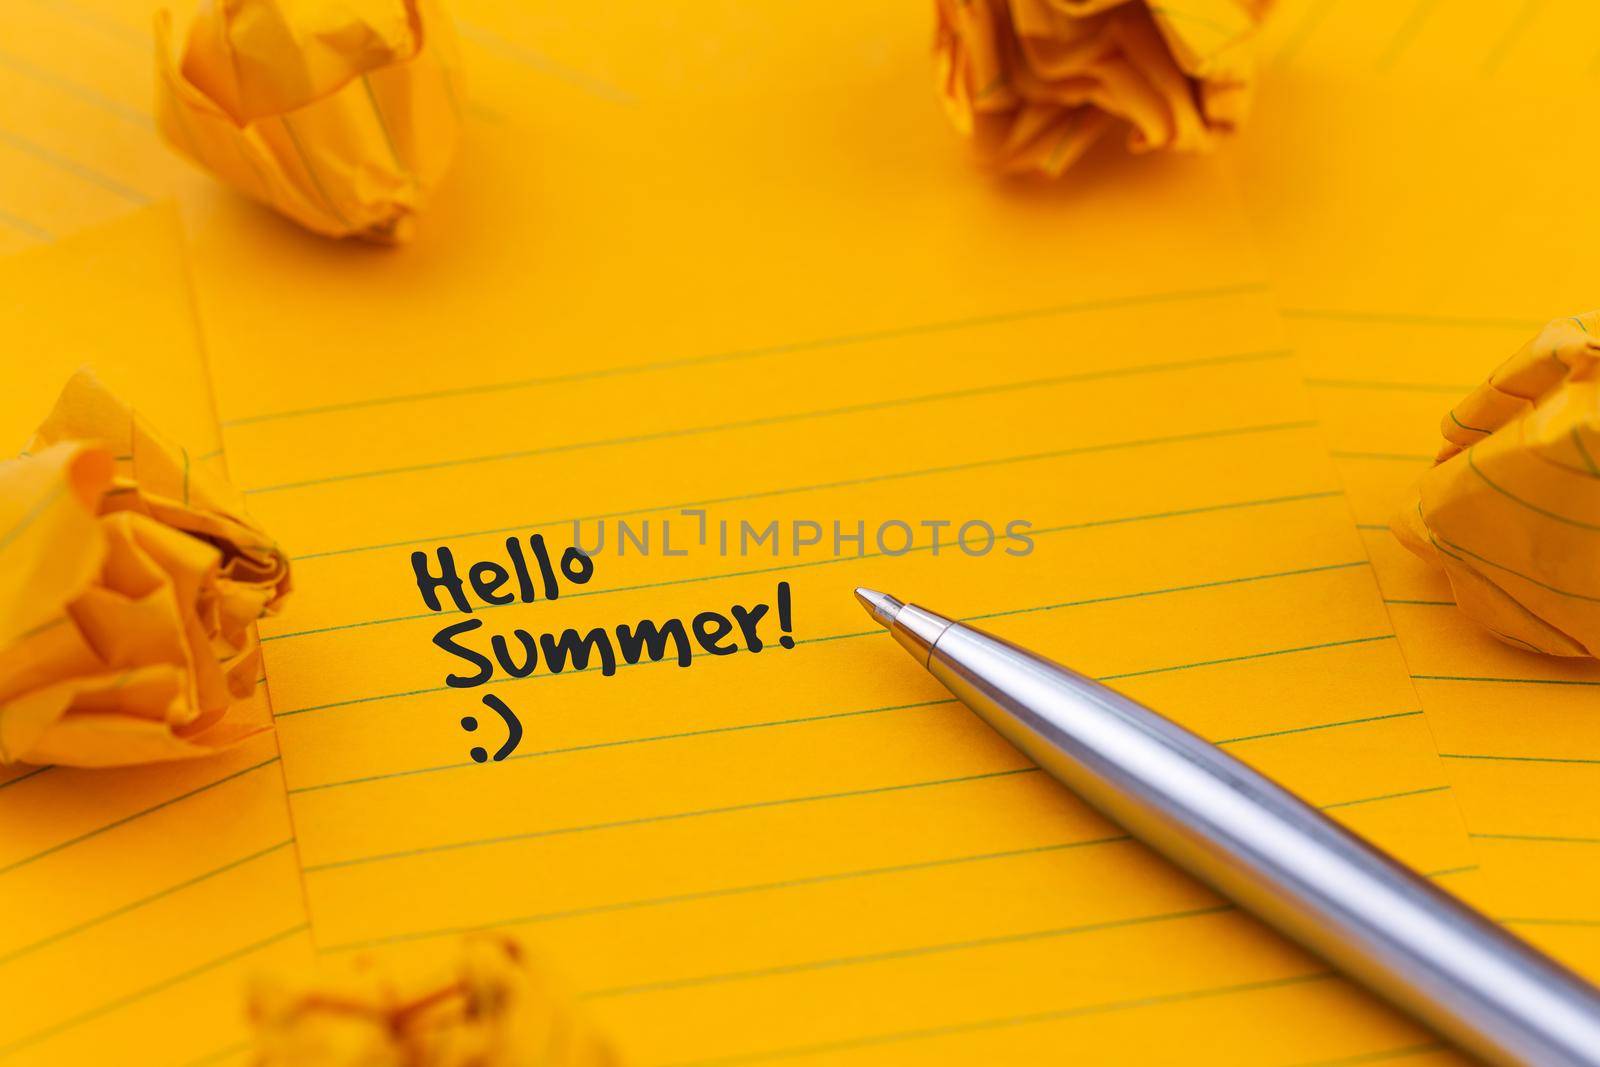 Concept Hello summer or planning a summer trip. Orange sheets of paper, pen and other stationery objects